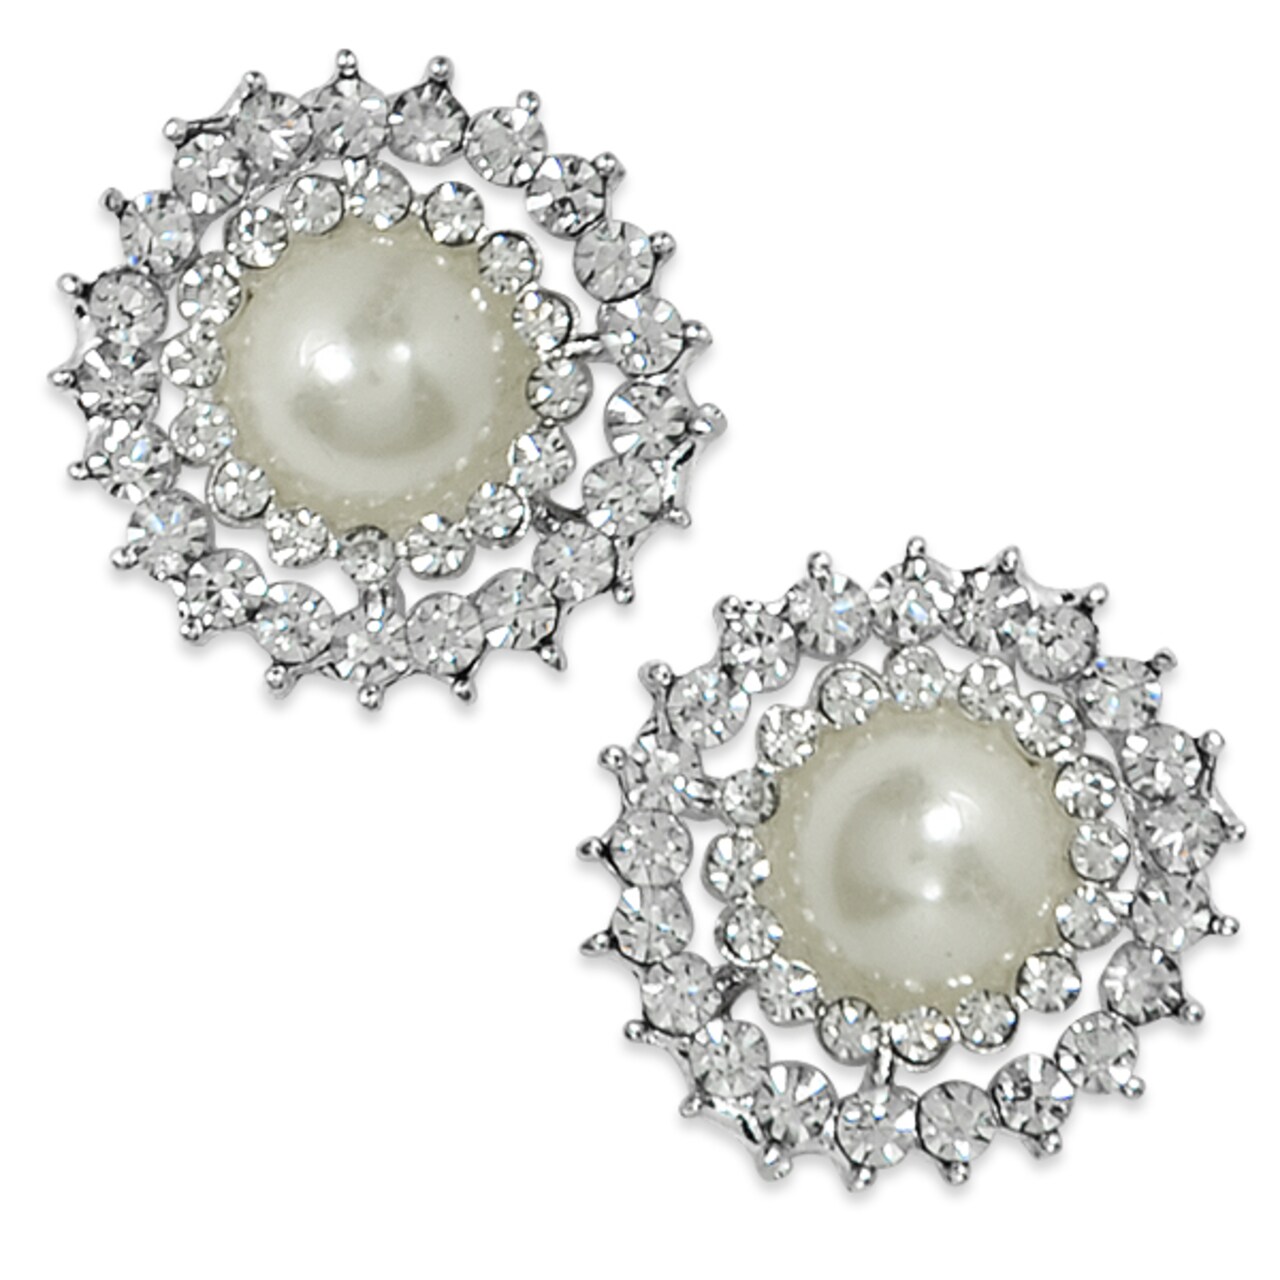 23mm Glass Rhinestone Buttons with Faux Pearl Pk/2